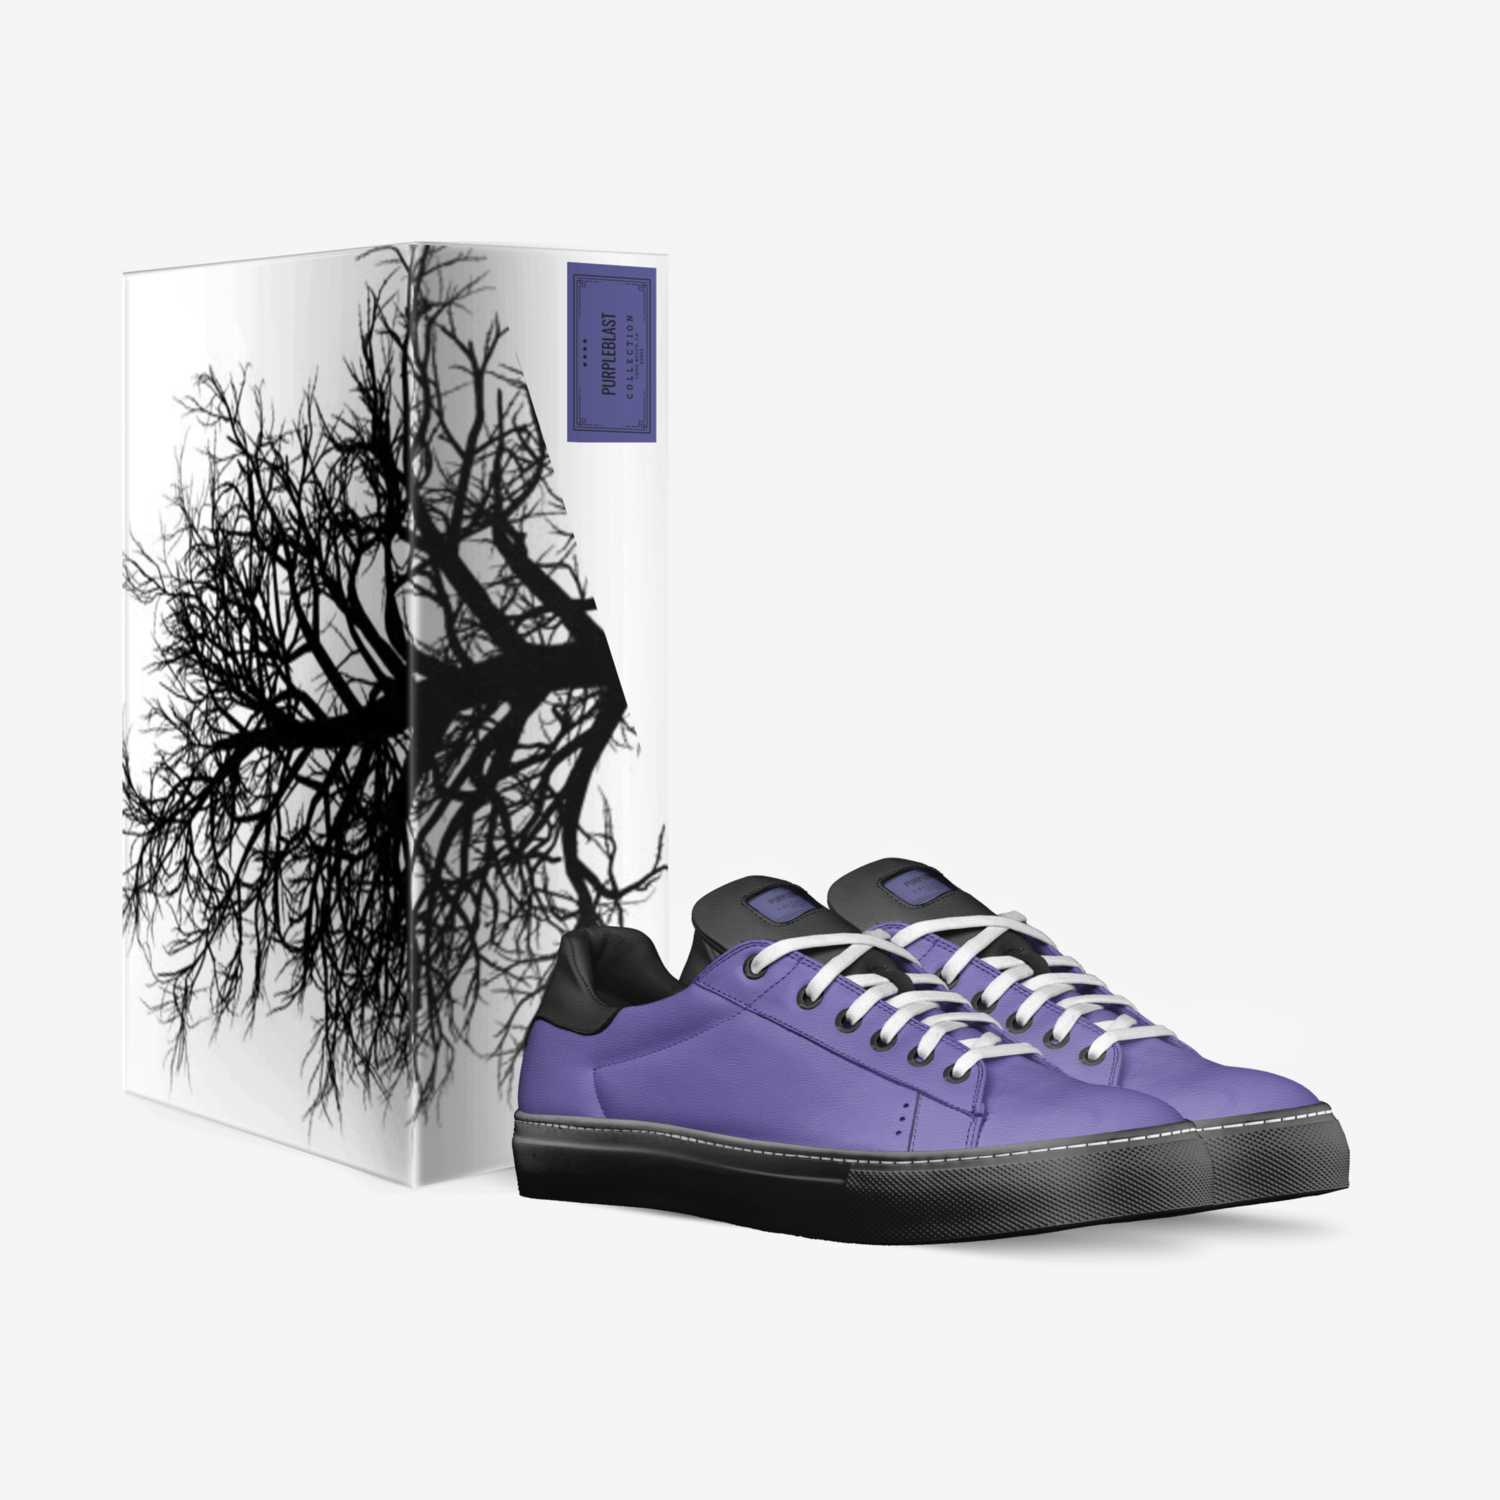 PurpleBlast custom made in Italy shoes by Erick Fuentes | Box view